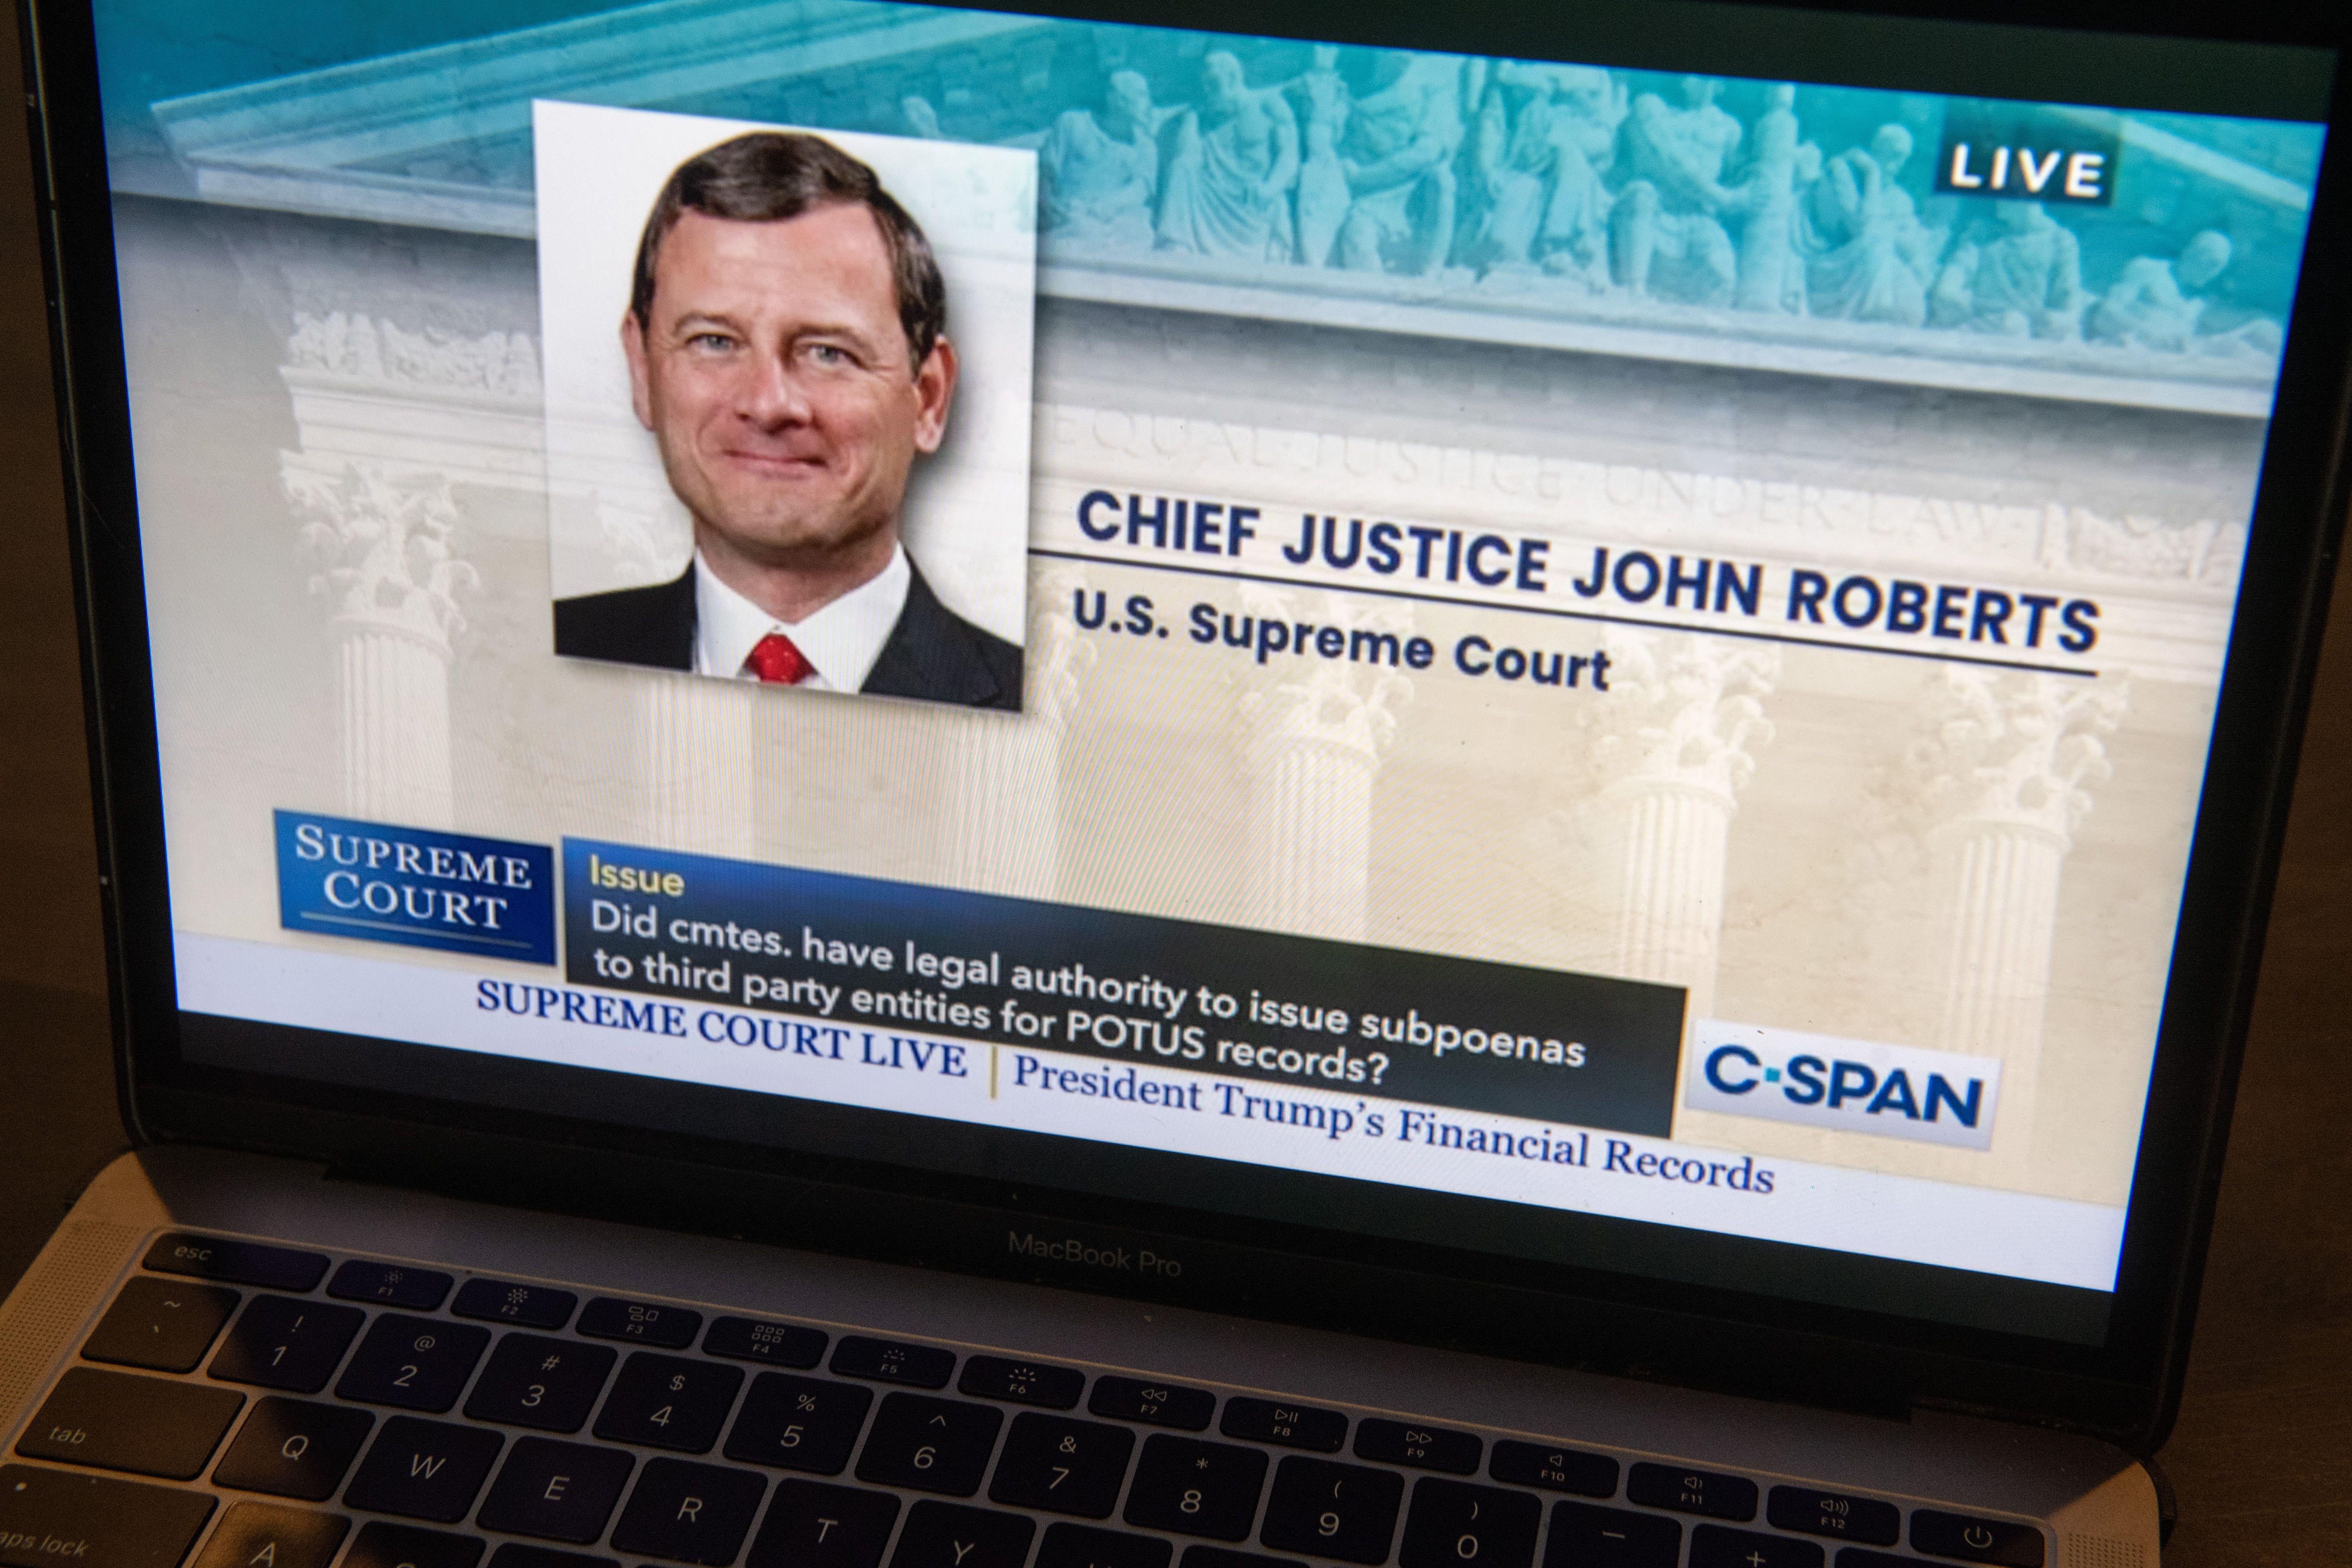 A photo of a computer with John Roberts' face on a C-Span presentation of live oral arguments.